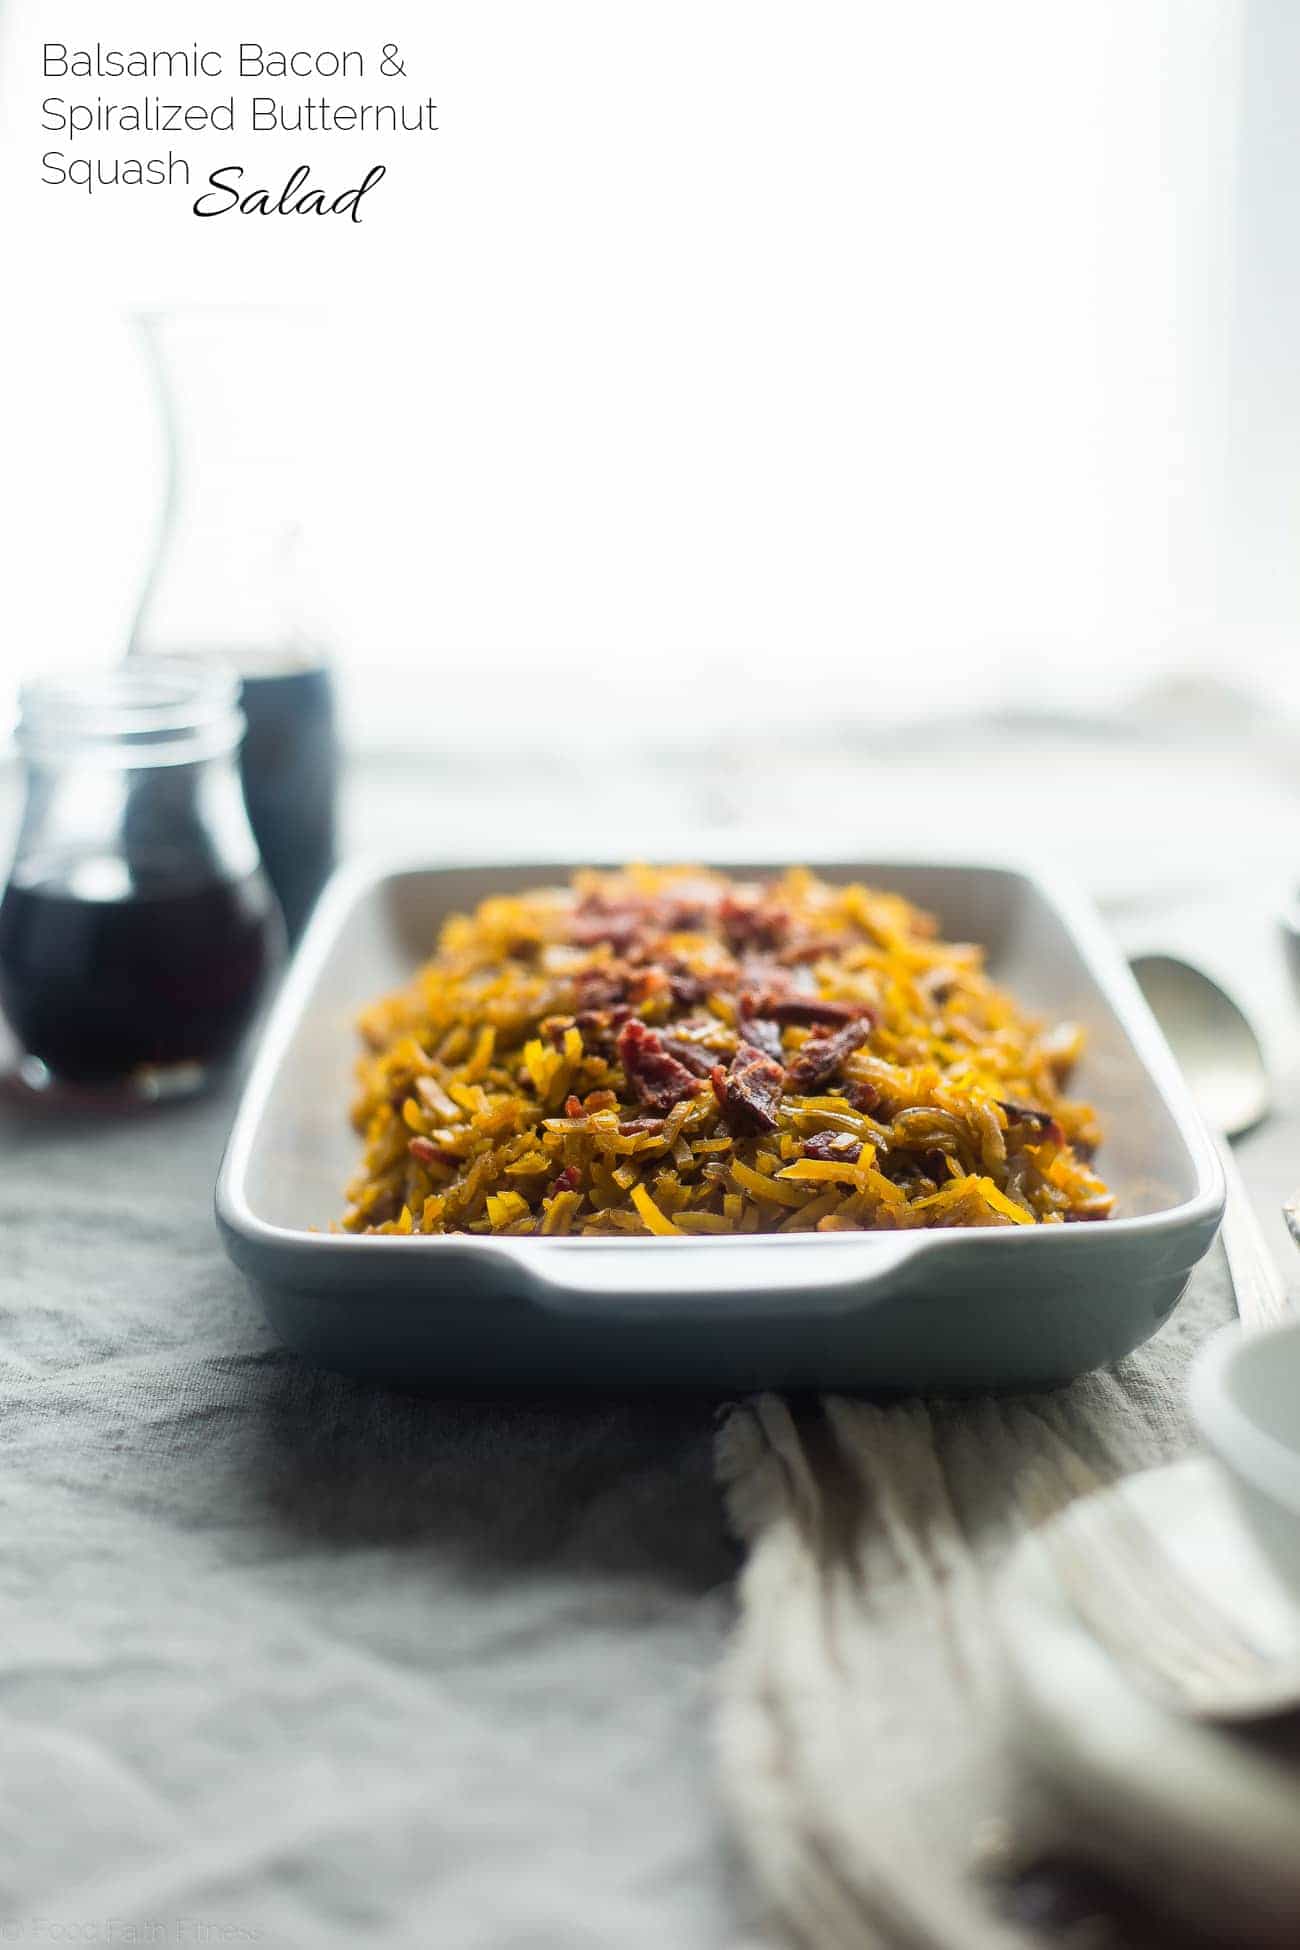 5 Ingredient Bacon Balsamic Butternut Squash Salad - This spiralized butternut squash salad features crispy bacon and a sweet and tangy maple glaze! It's a healthy, paleo friendly side dish with only 5 ingredients! | Foodfaithfitness.com | @FoodFaithFit